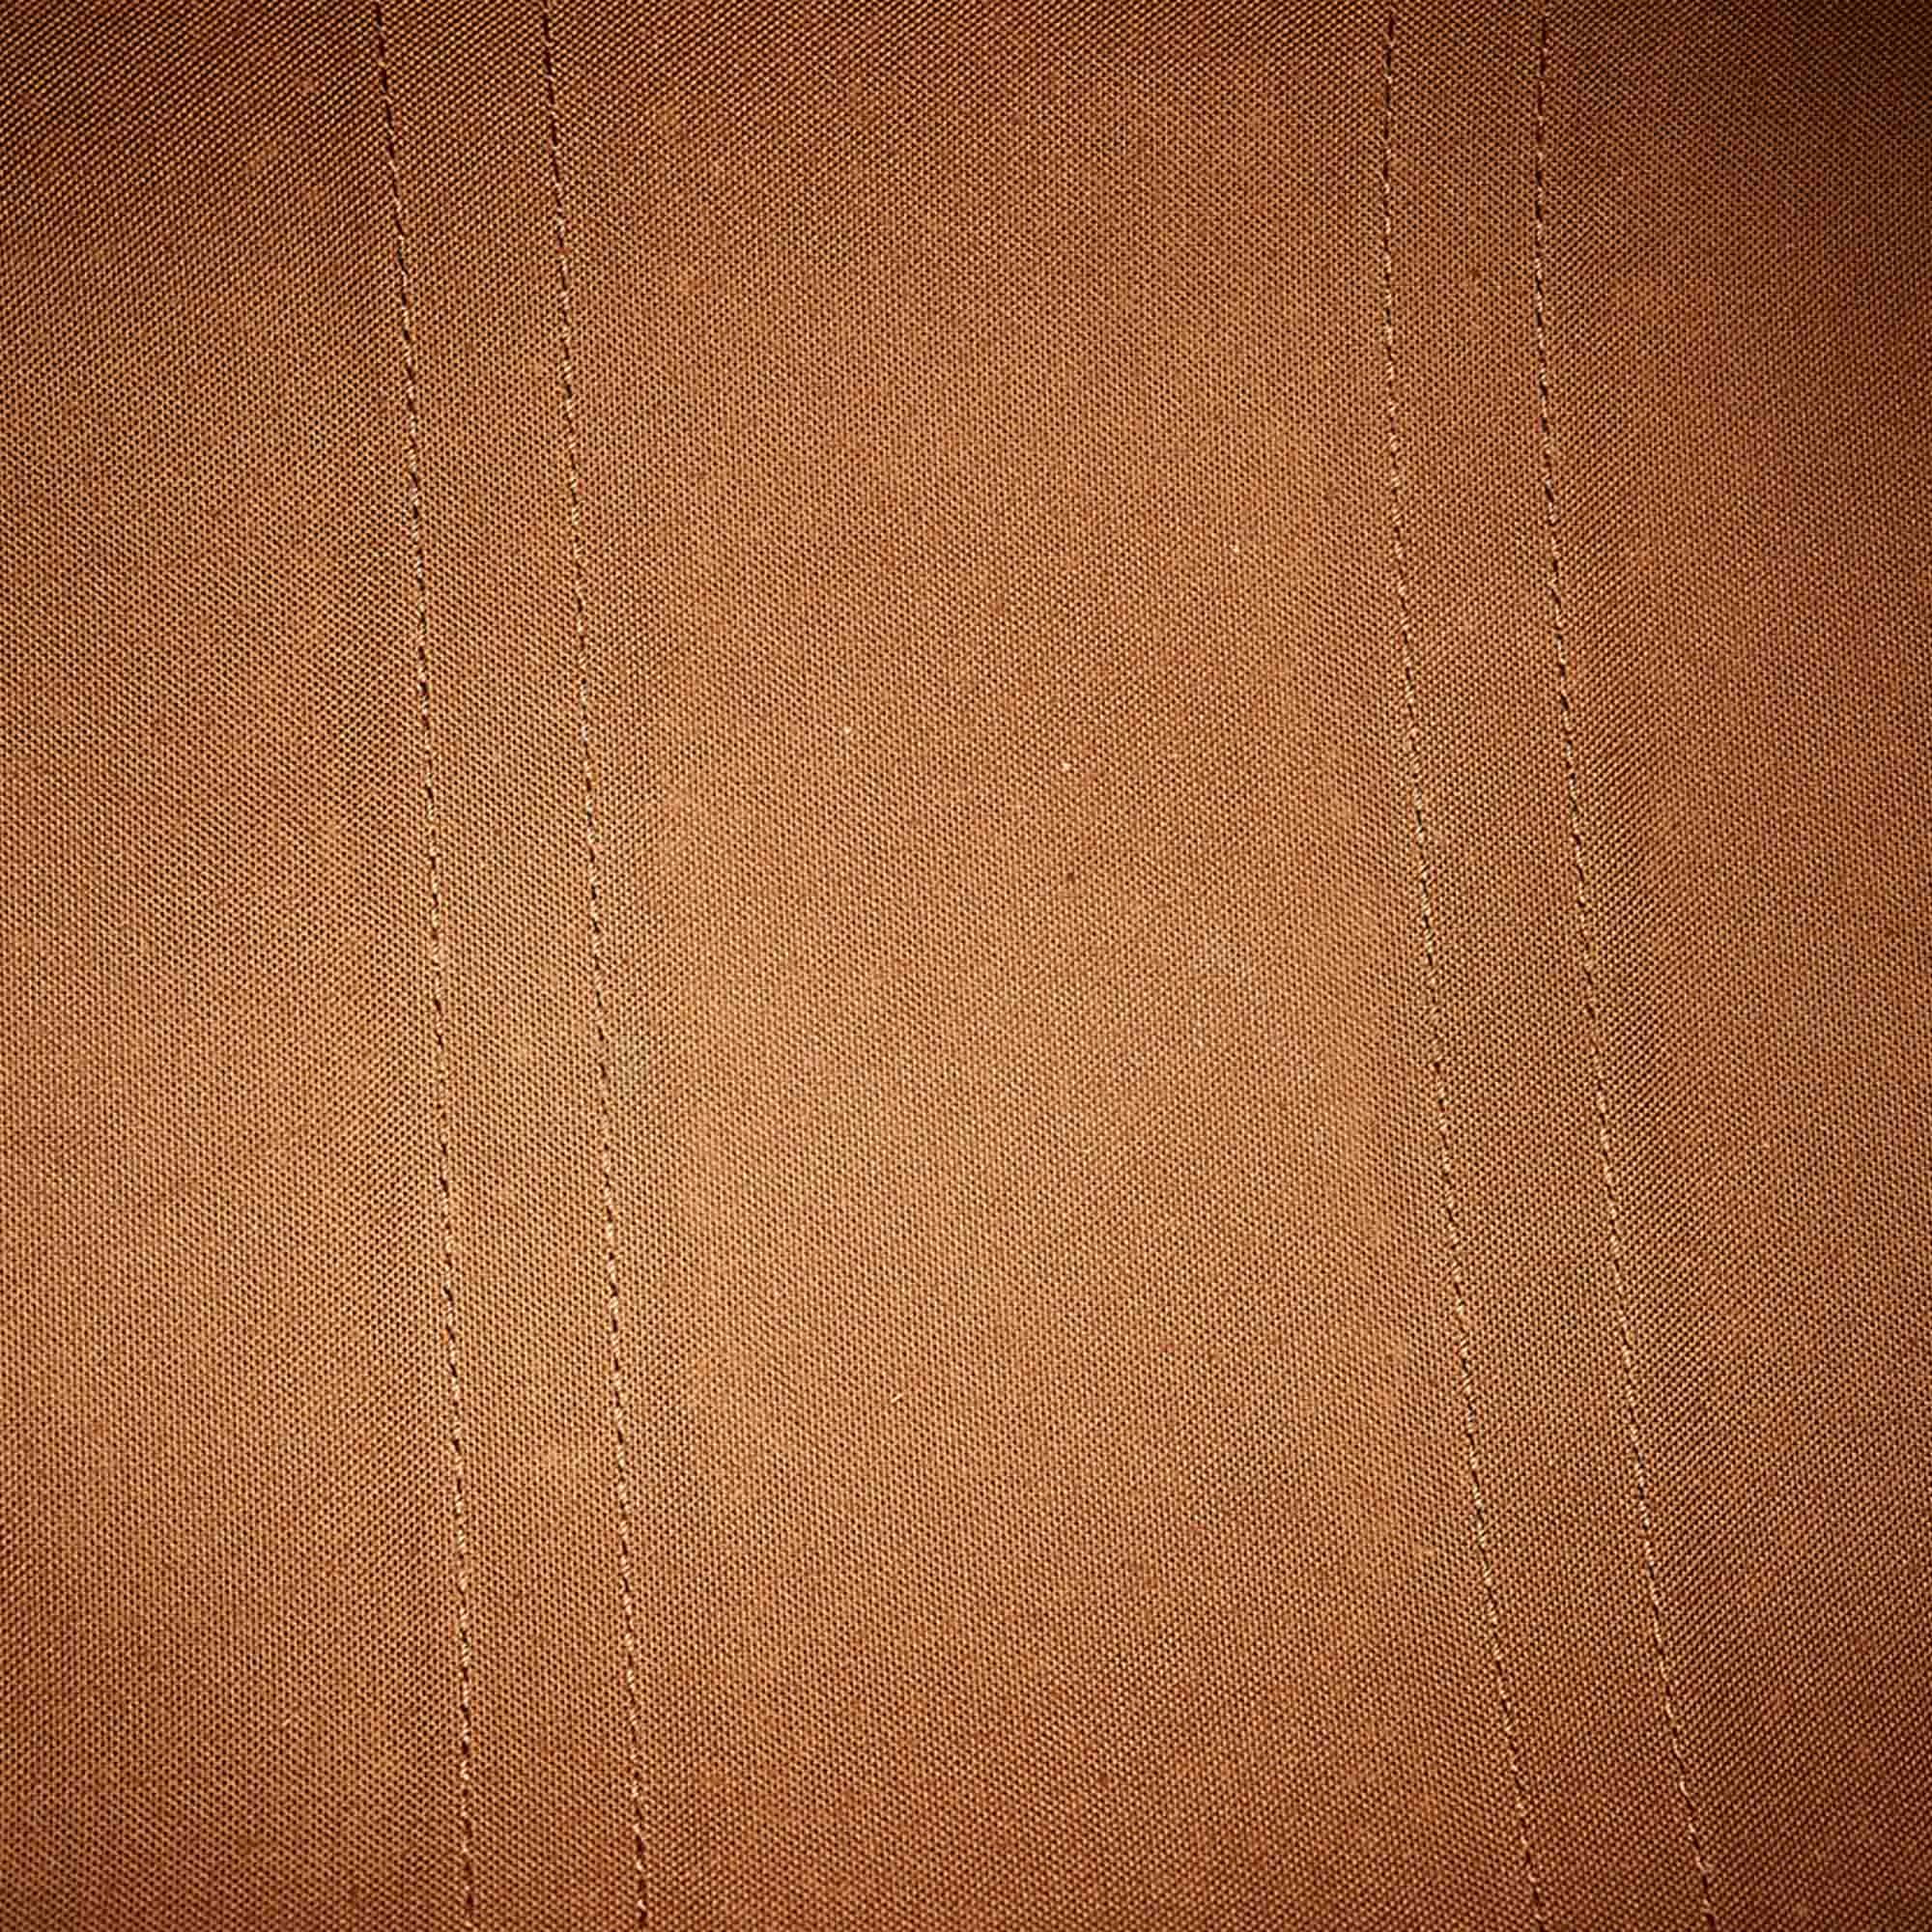 VINTAGE. RRP AS NEW. The Keepall 45 a monogram canvas body, rolled leather handles, and a top zip closure.Exterior back is discolored. Exterior bottom is discolored and stained. Exterior corners is discolored, scratched and stained. Exterior front is discolored, scratched and stained. Exterior handle is discolored and scratched. Exterior side is discolored. Zipper is tarnished.

Dimensions:
Length 25.5cm
Width 45cm
Depth 17cm
Hand Drop 10cm
Shoulder Drop 10cm

Original Accessories: Name Tag, Dust Bag

Serial Number: SP0925
Color: Brown
Material: Canvas x Monogram Canvas x Leather x Vachetta Leather
Country of Origin: France
Boutique Reference: SSU121918K1342


Product Rating: GoodCondition